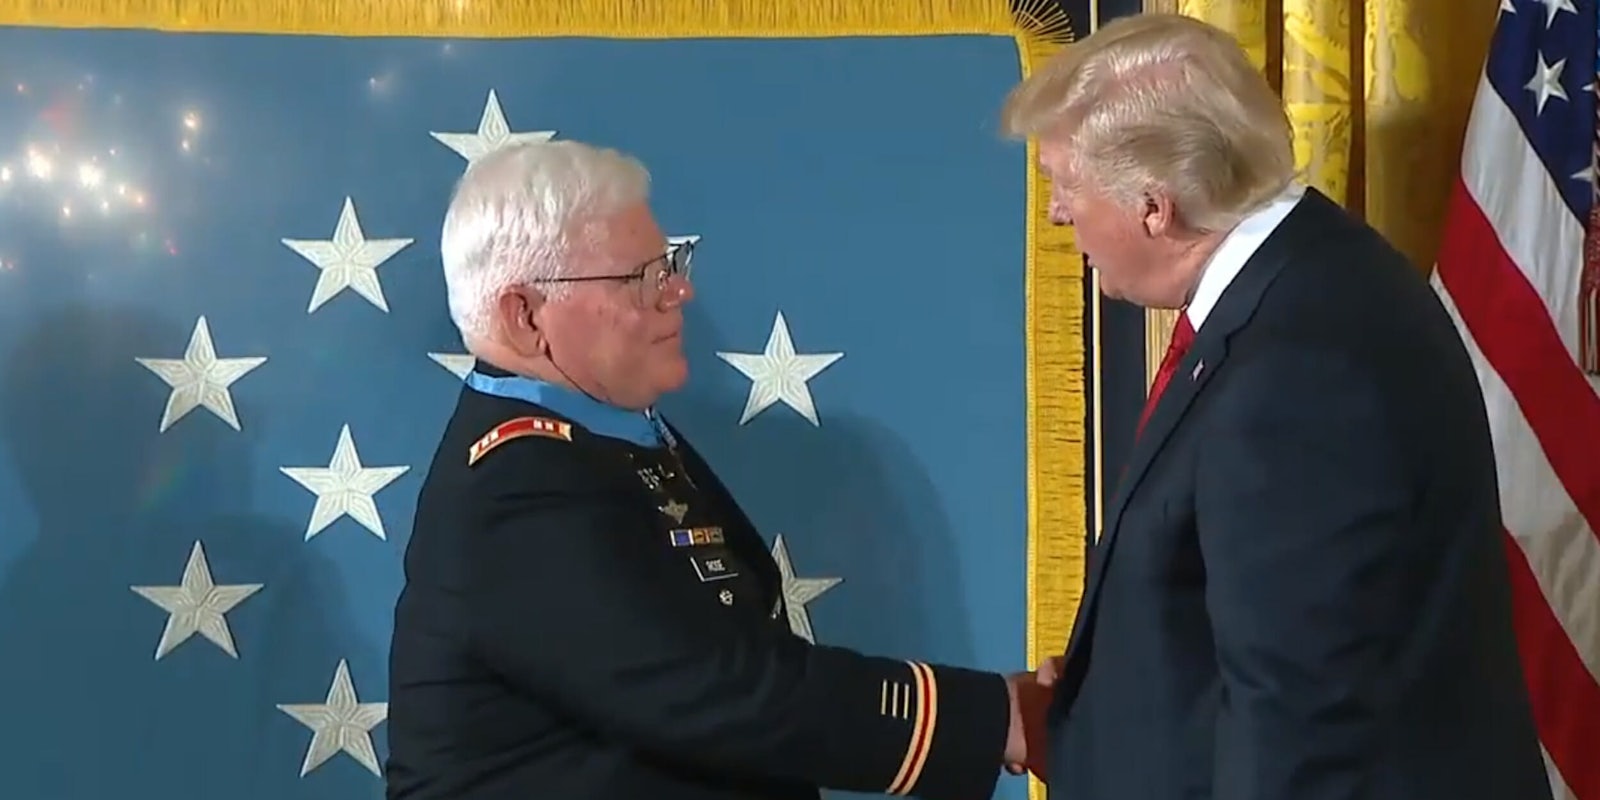 Not even Congressional Medal of Honor recipient Capt. Gary Rose was safe from feeling the wrath of vice-grip of a handshake from President Donald Trump.